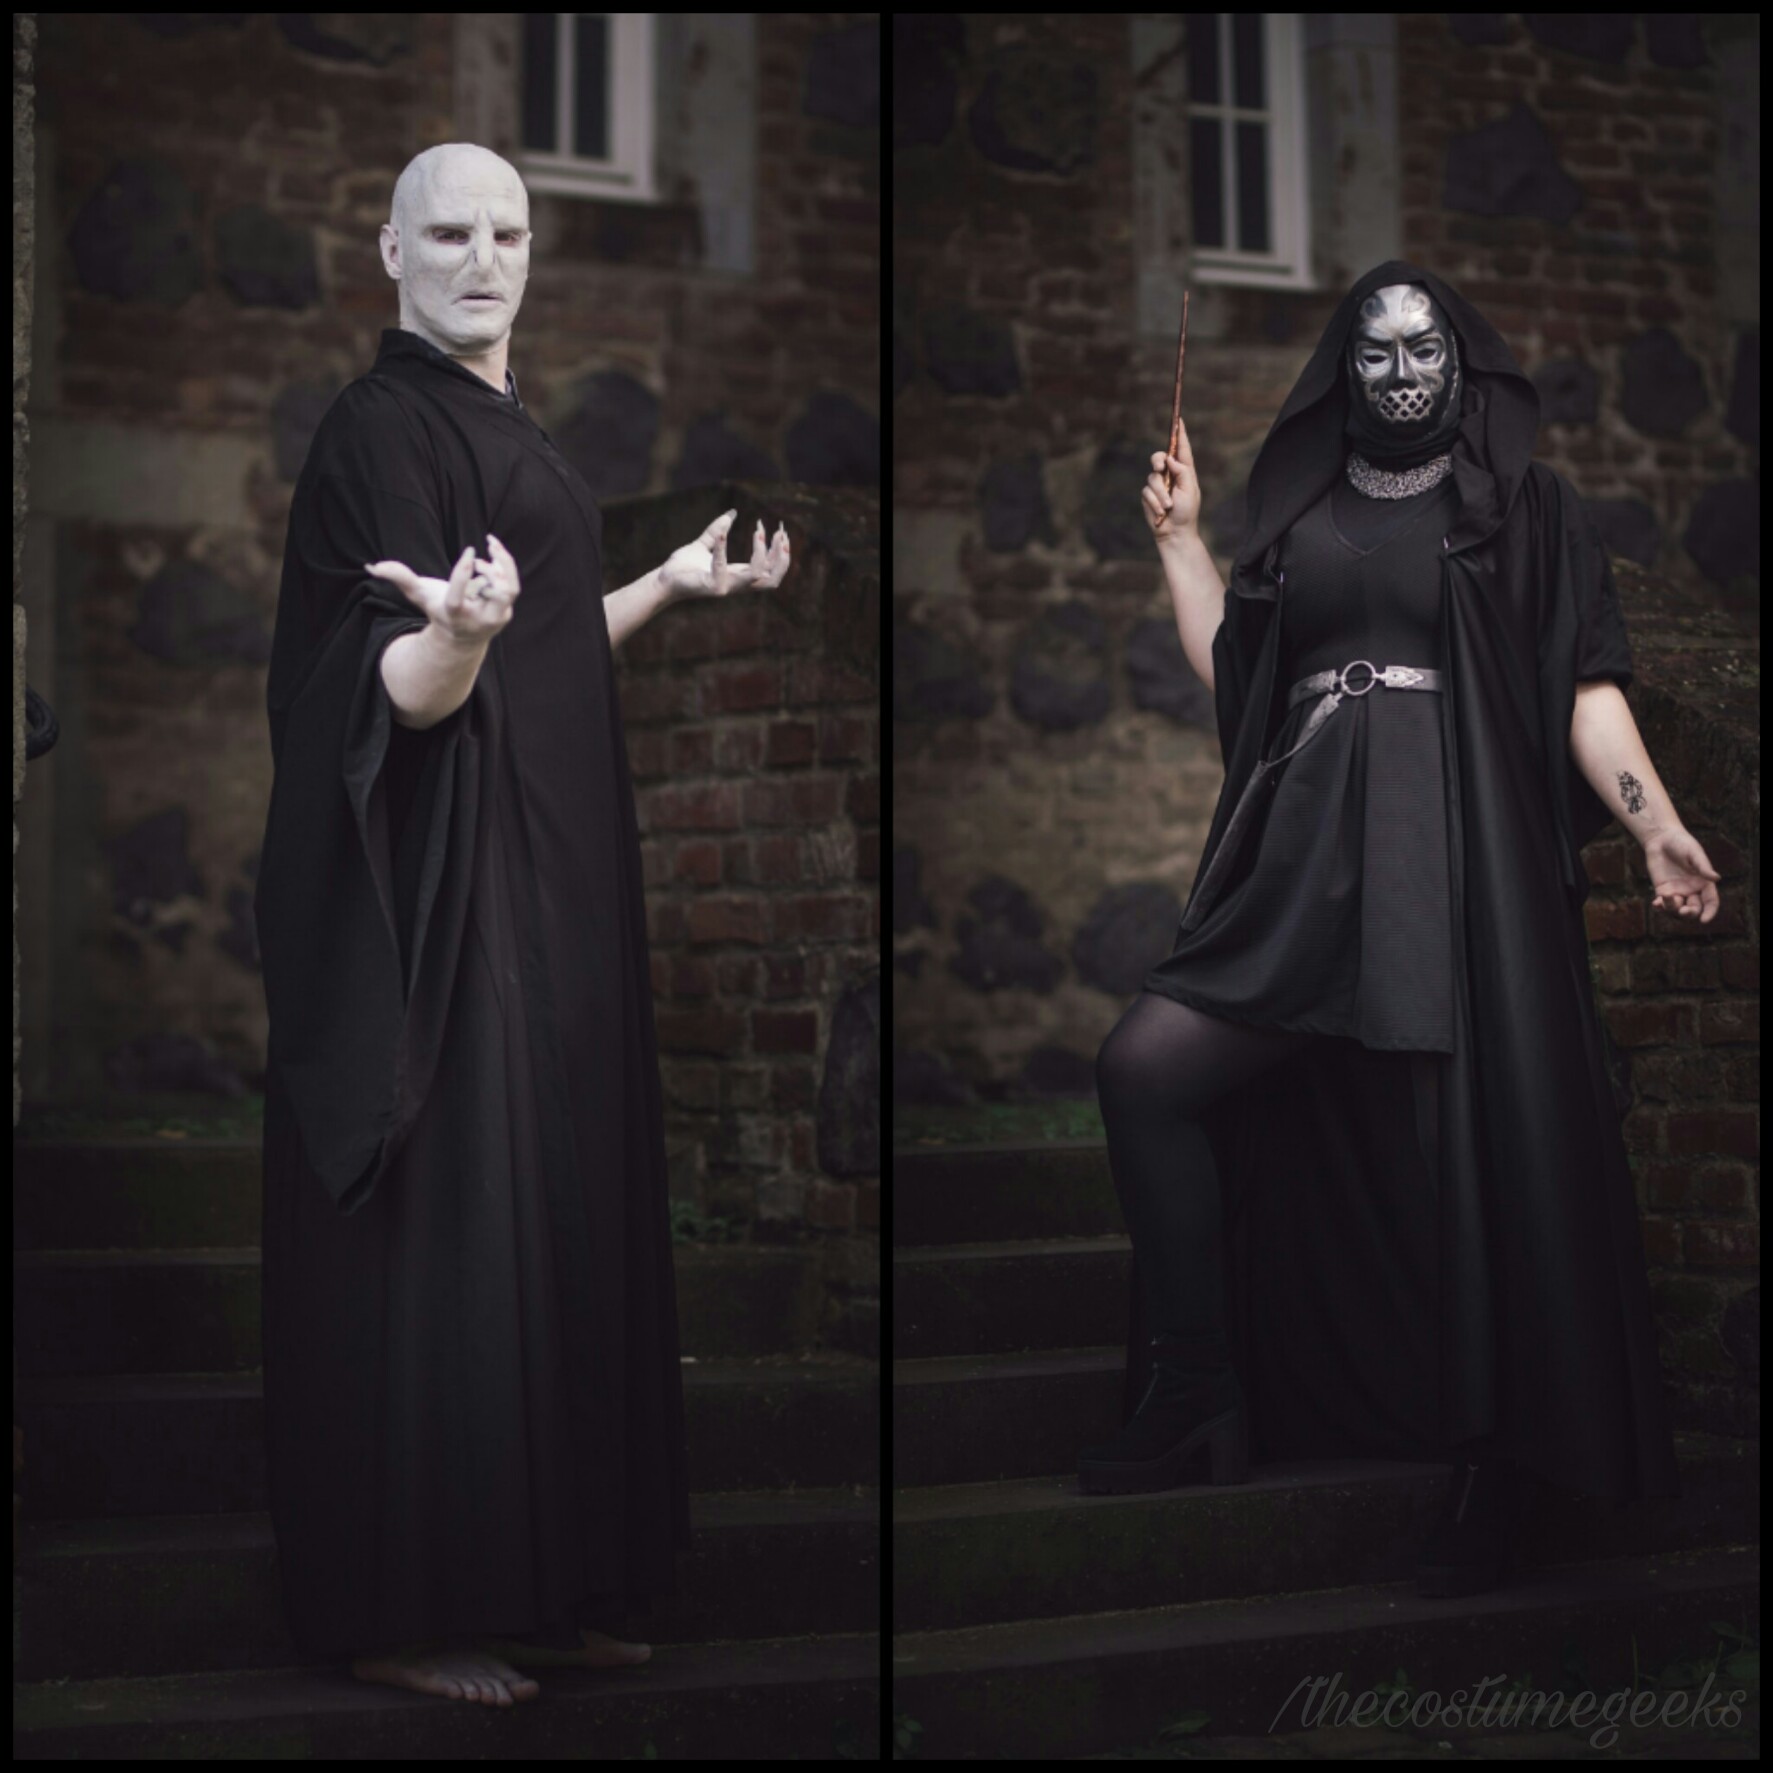 TheCostumeGeek – Lord Voldemort & Todesser – Harry Potter